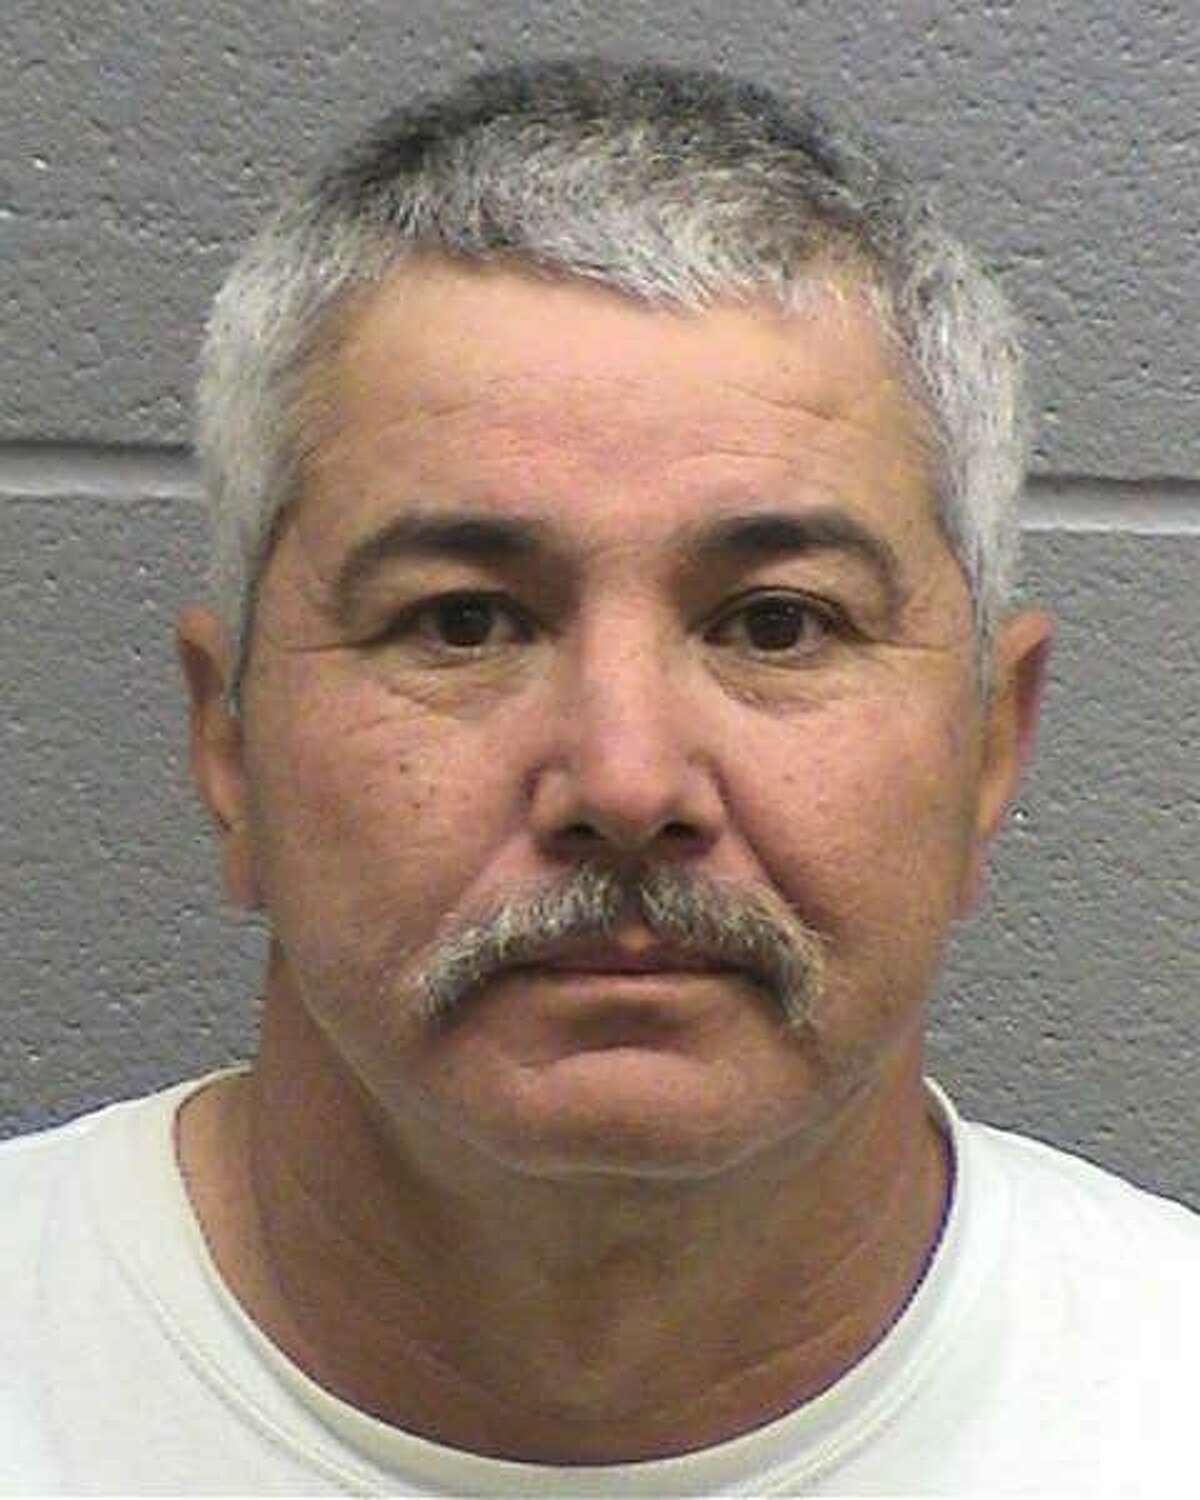 Vicente L. Adame, 52, of Midland, was arrested Nov. 6 on a third or more charge of driving while intoxicated.